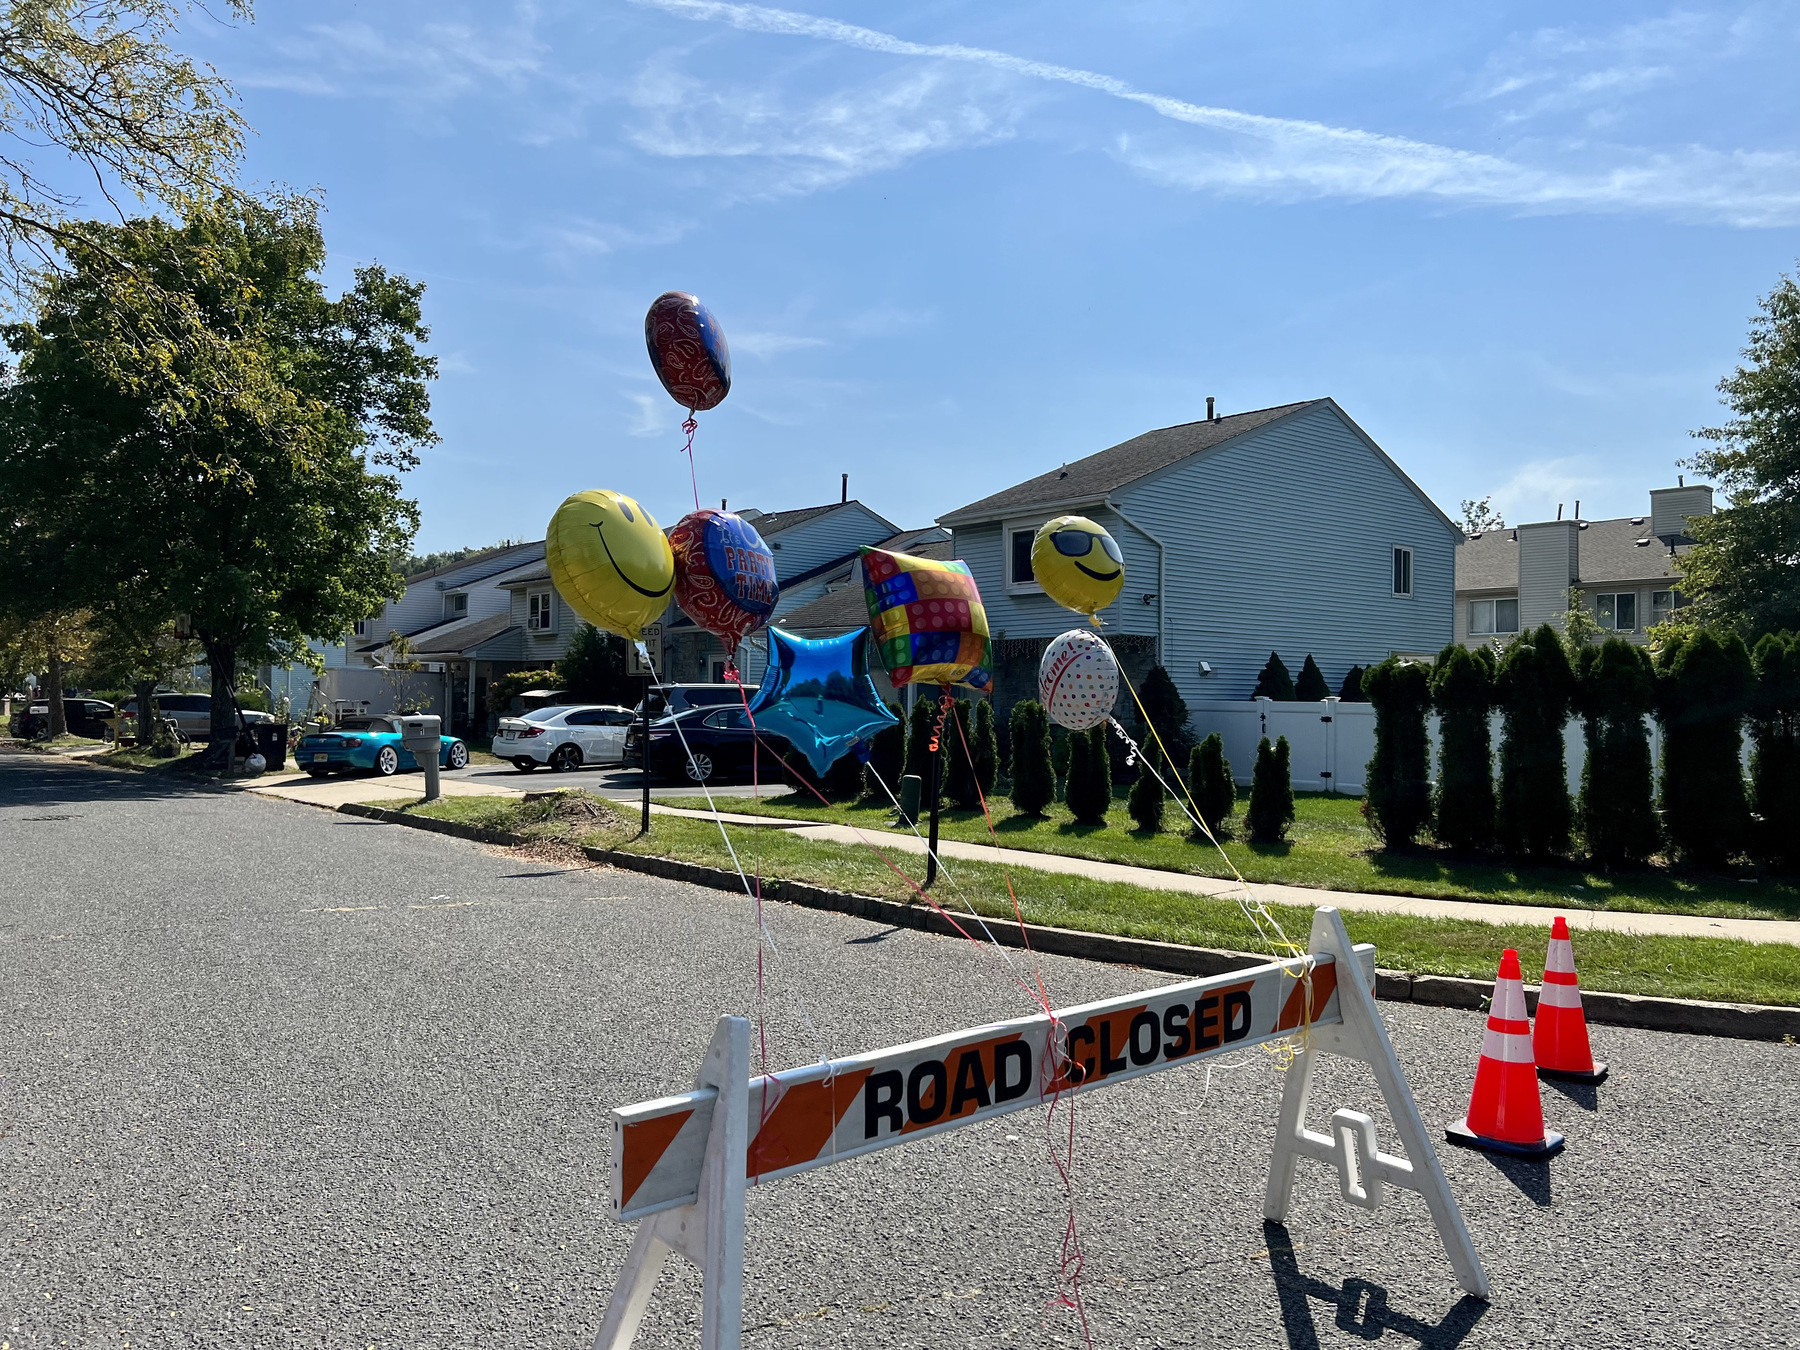 Road closed sign with balloons attached to advertise a party